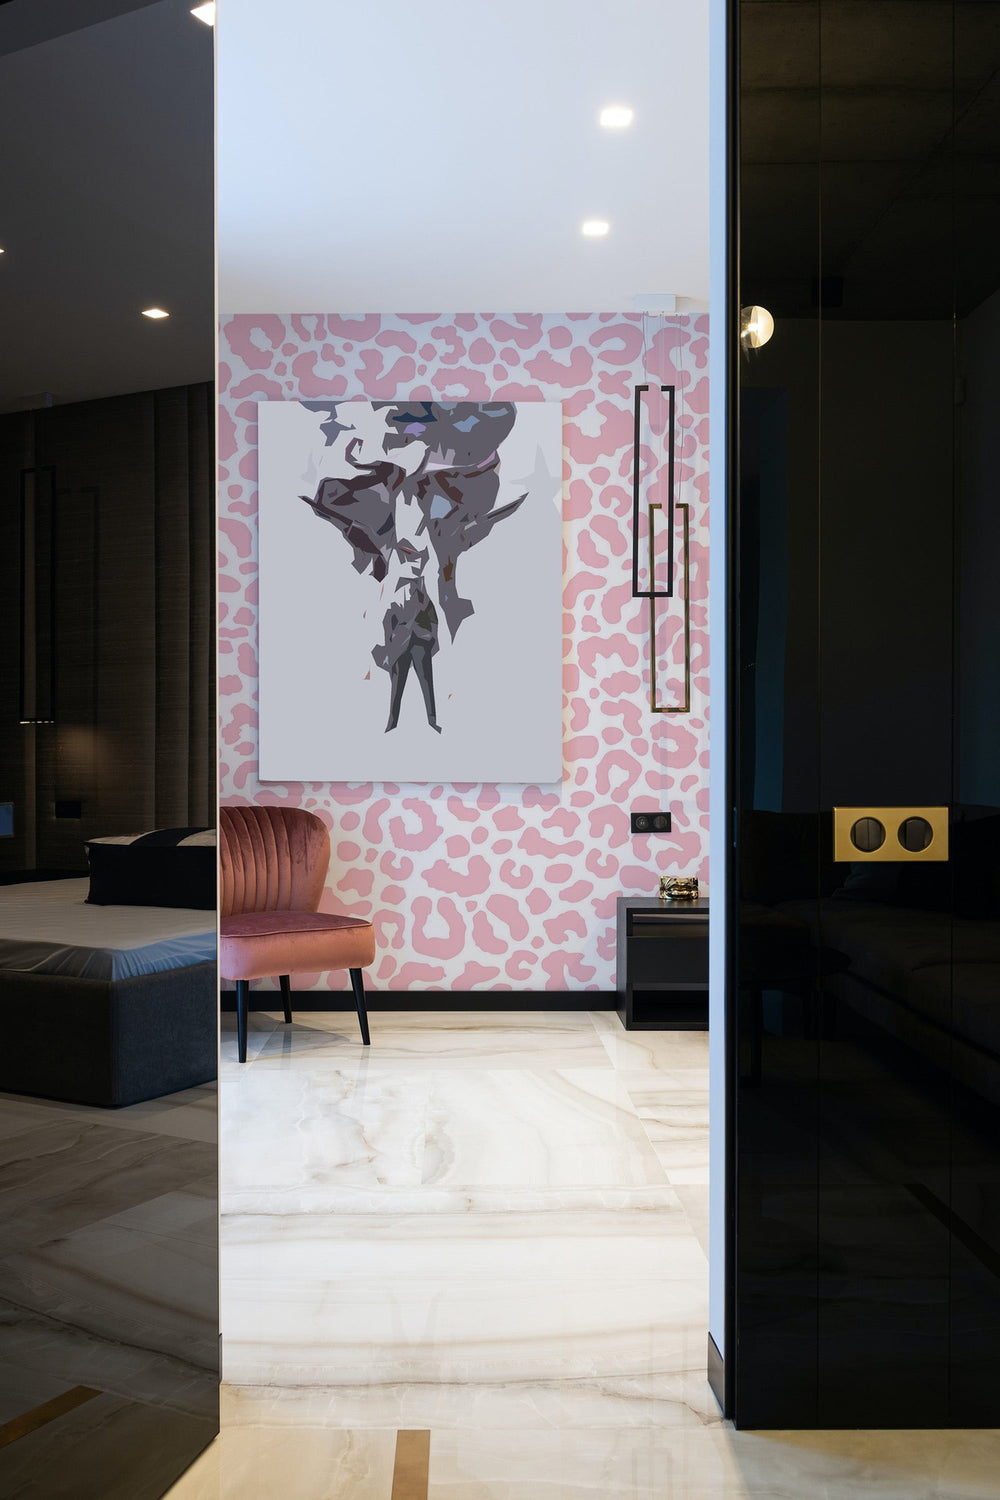 A stylish interior featuring a sleek bedroom with a large abstract mural on the wall, pink and gray wall pattern, and elegant marble flooring.